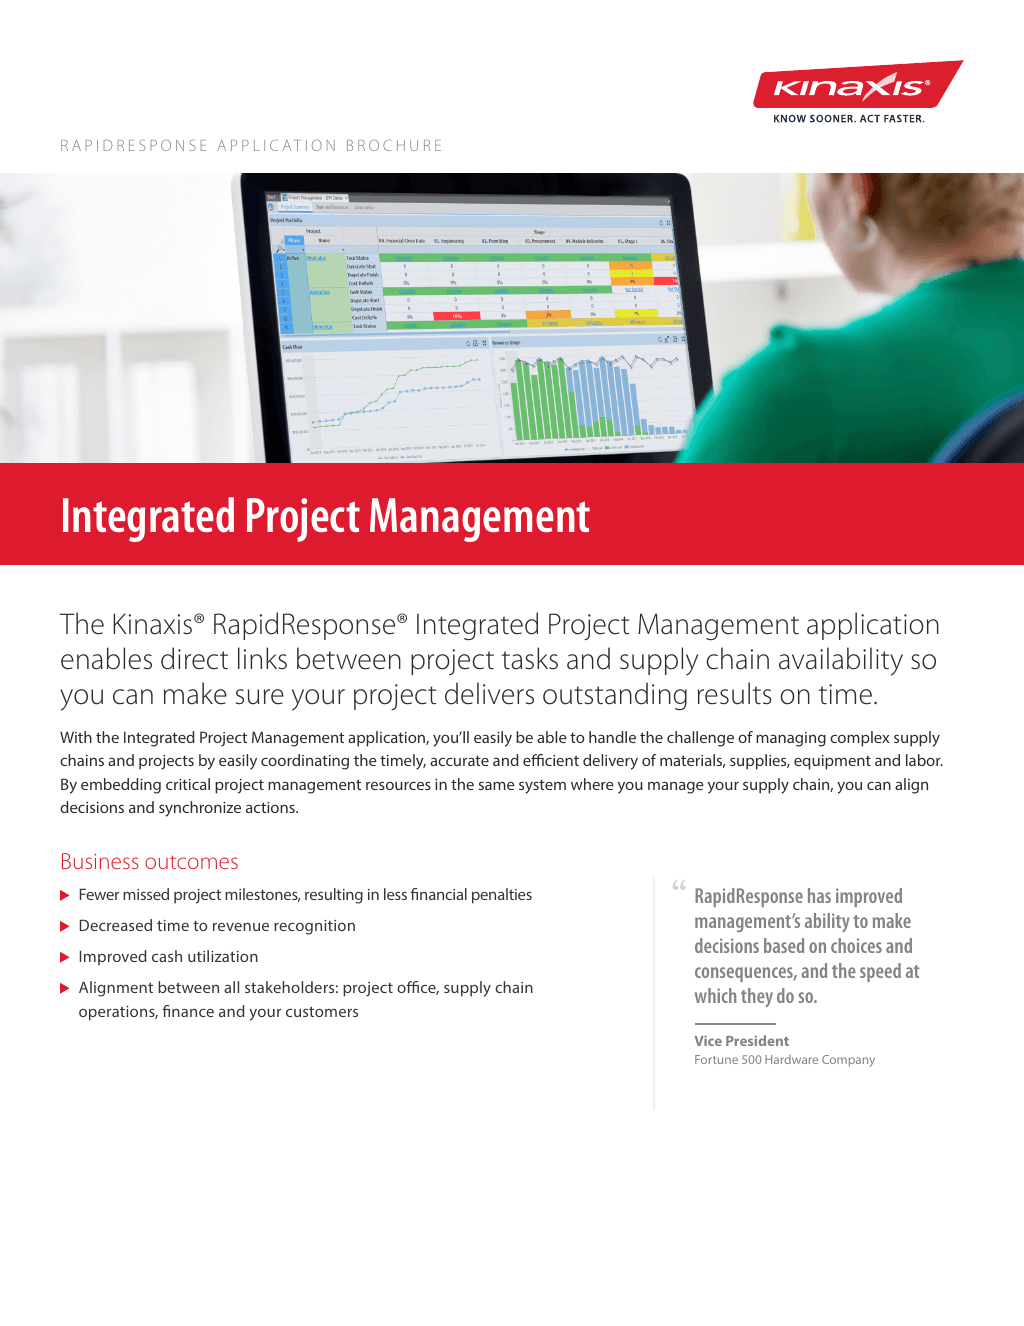 UseCase: Integrated Project Management brochure